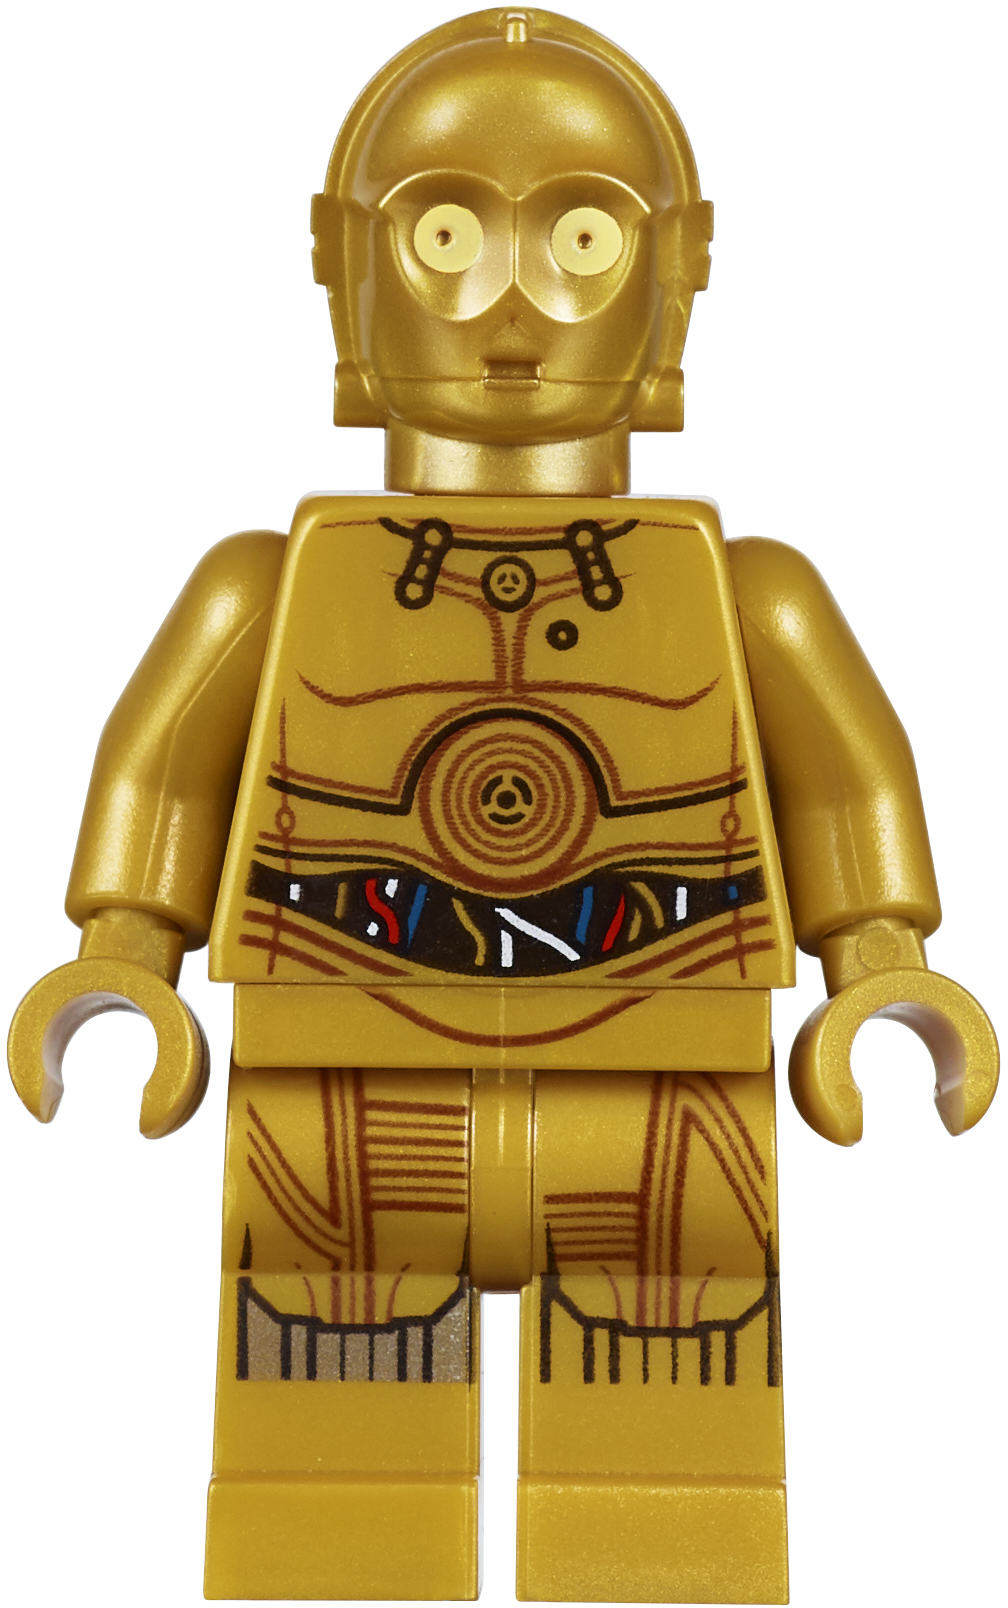 LEGO STAR WARS The Force Awakens MINIFIGURE C-3PO with Red Arm